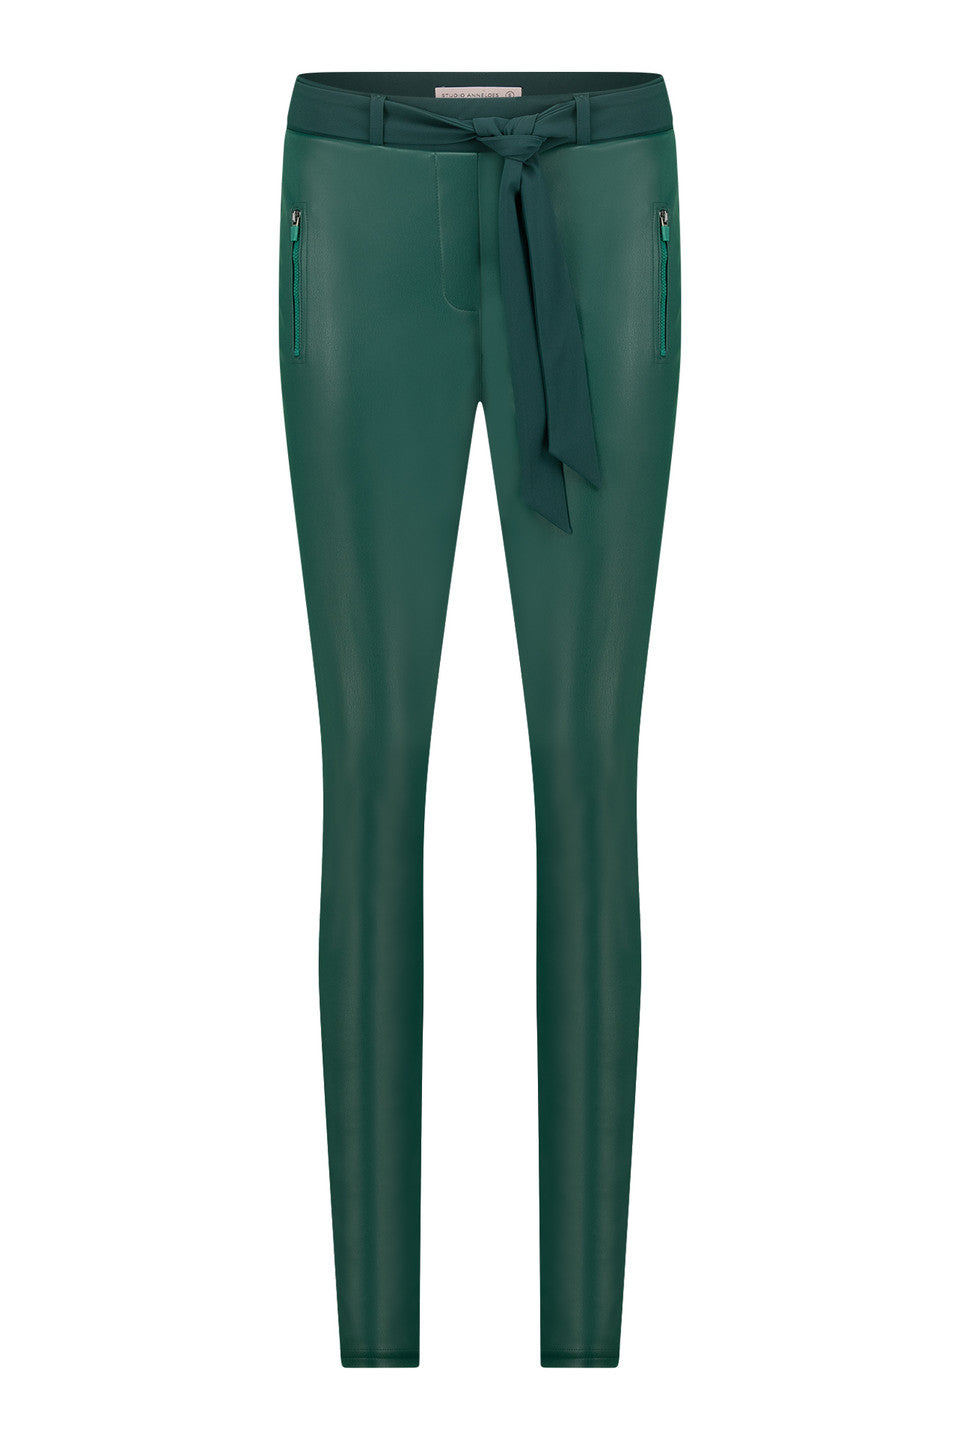 Studio Anneloes Margot faux leather trousers